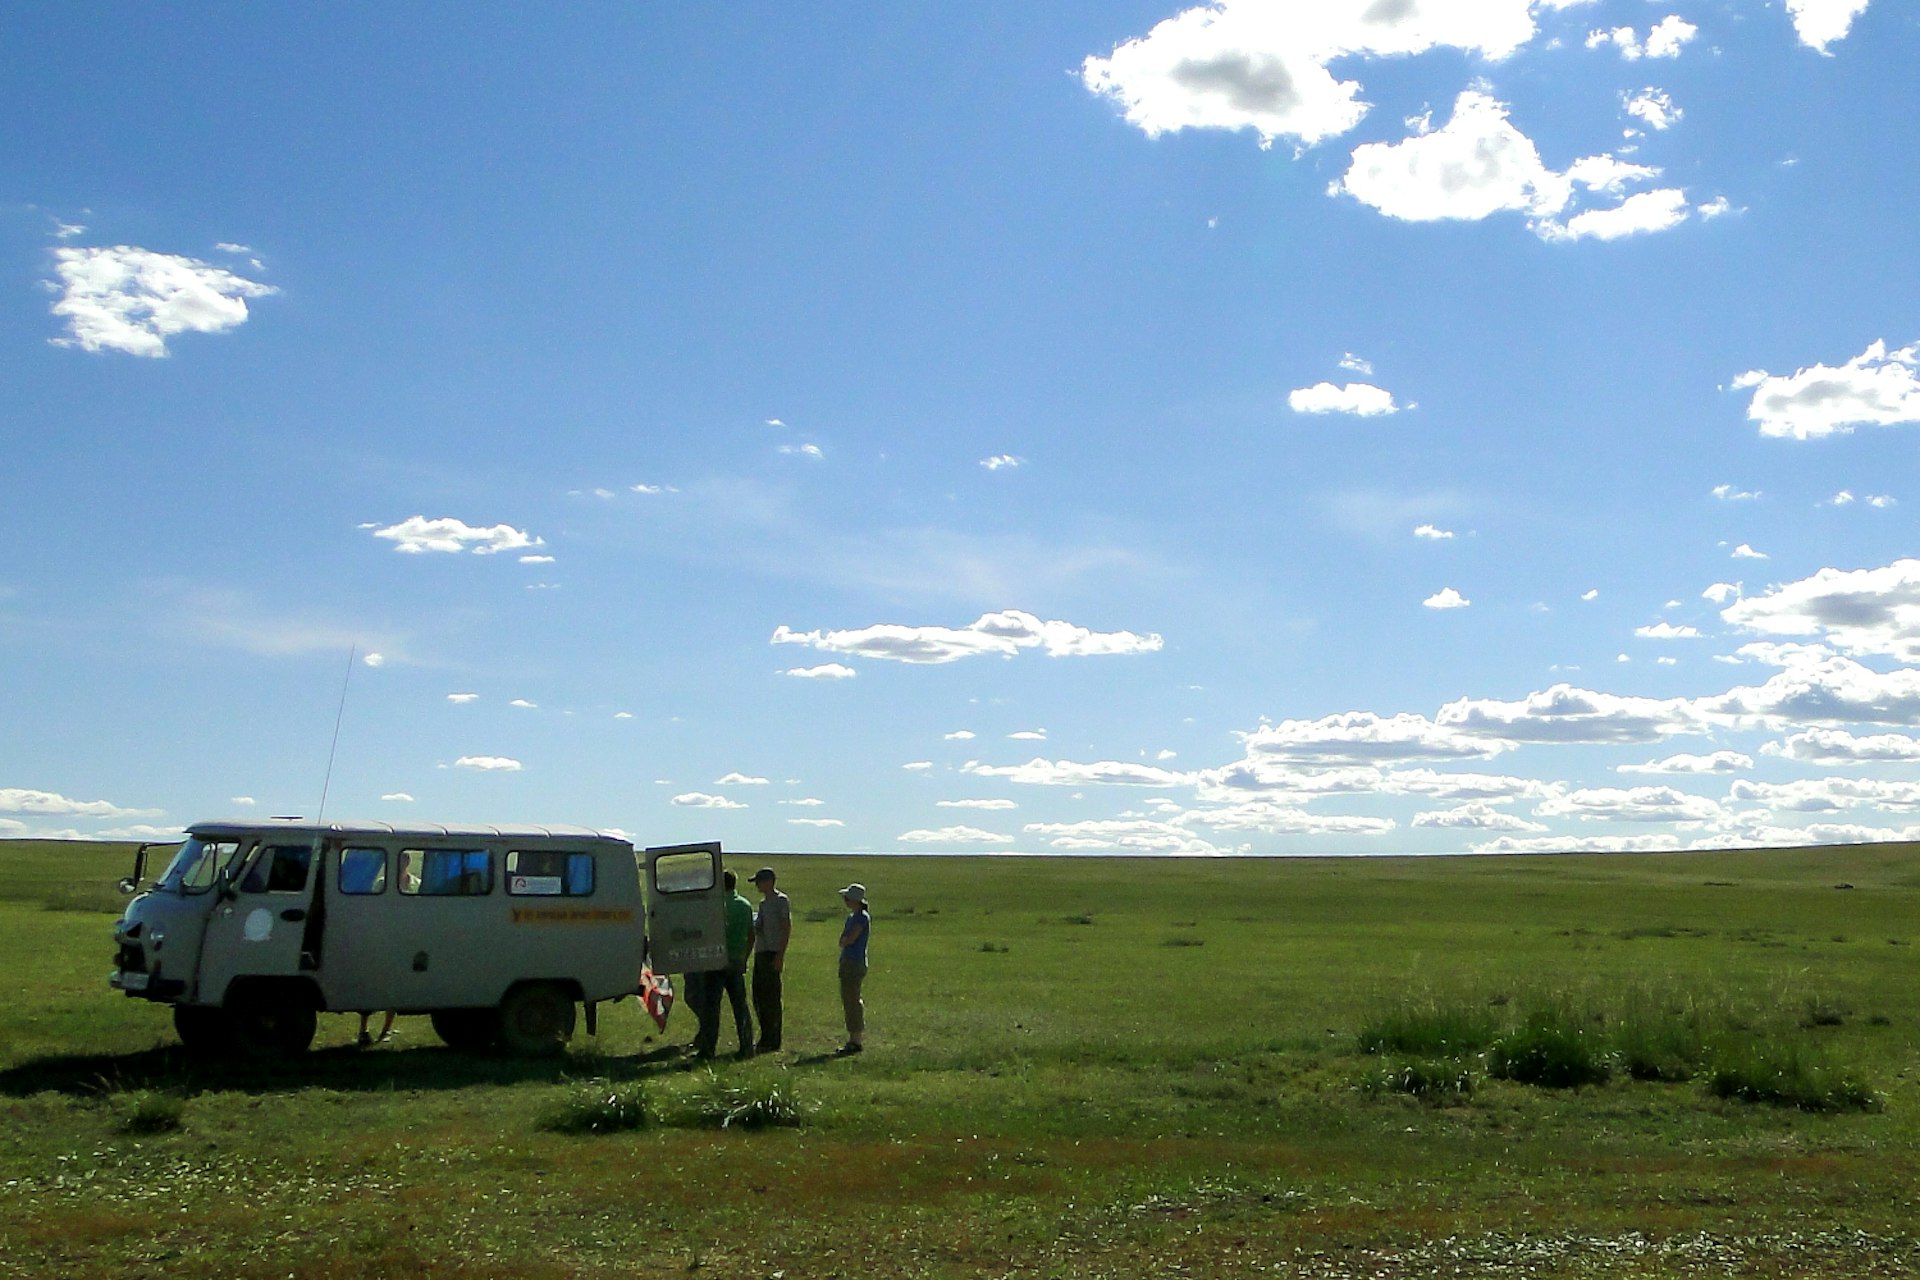 Most Mongolian road trips are done in no-frills UAZ vans. Image by Stephen Lioy / Lonely Planet